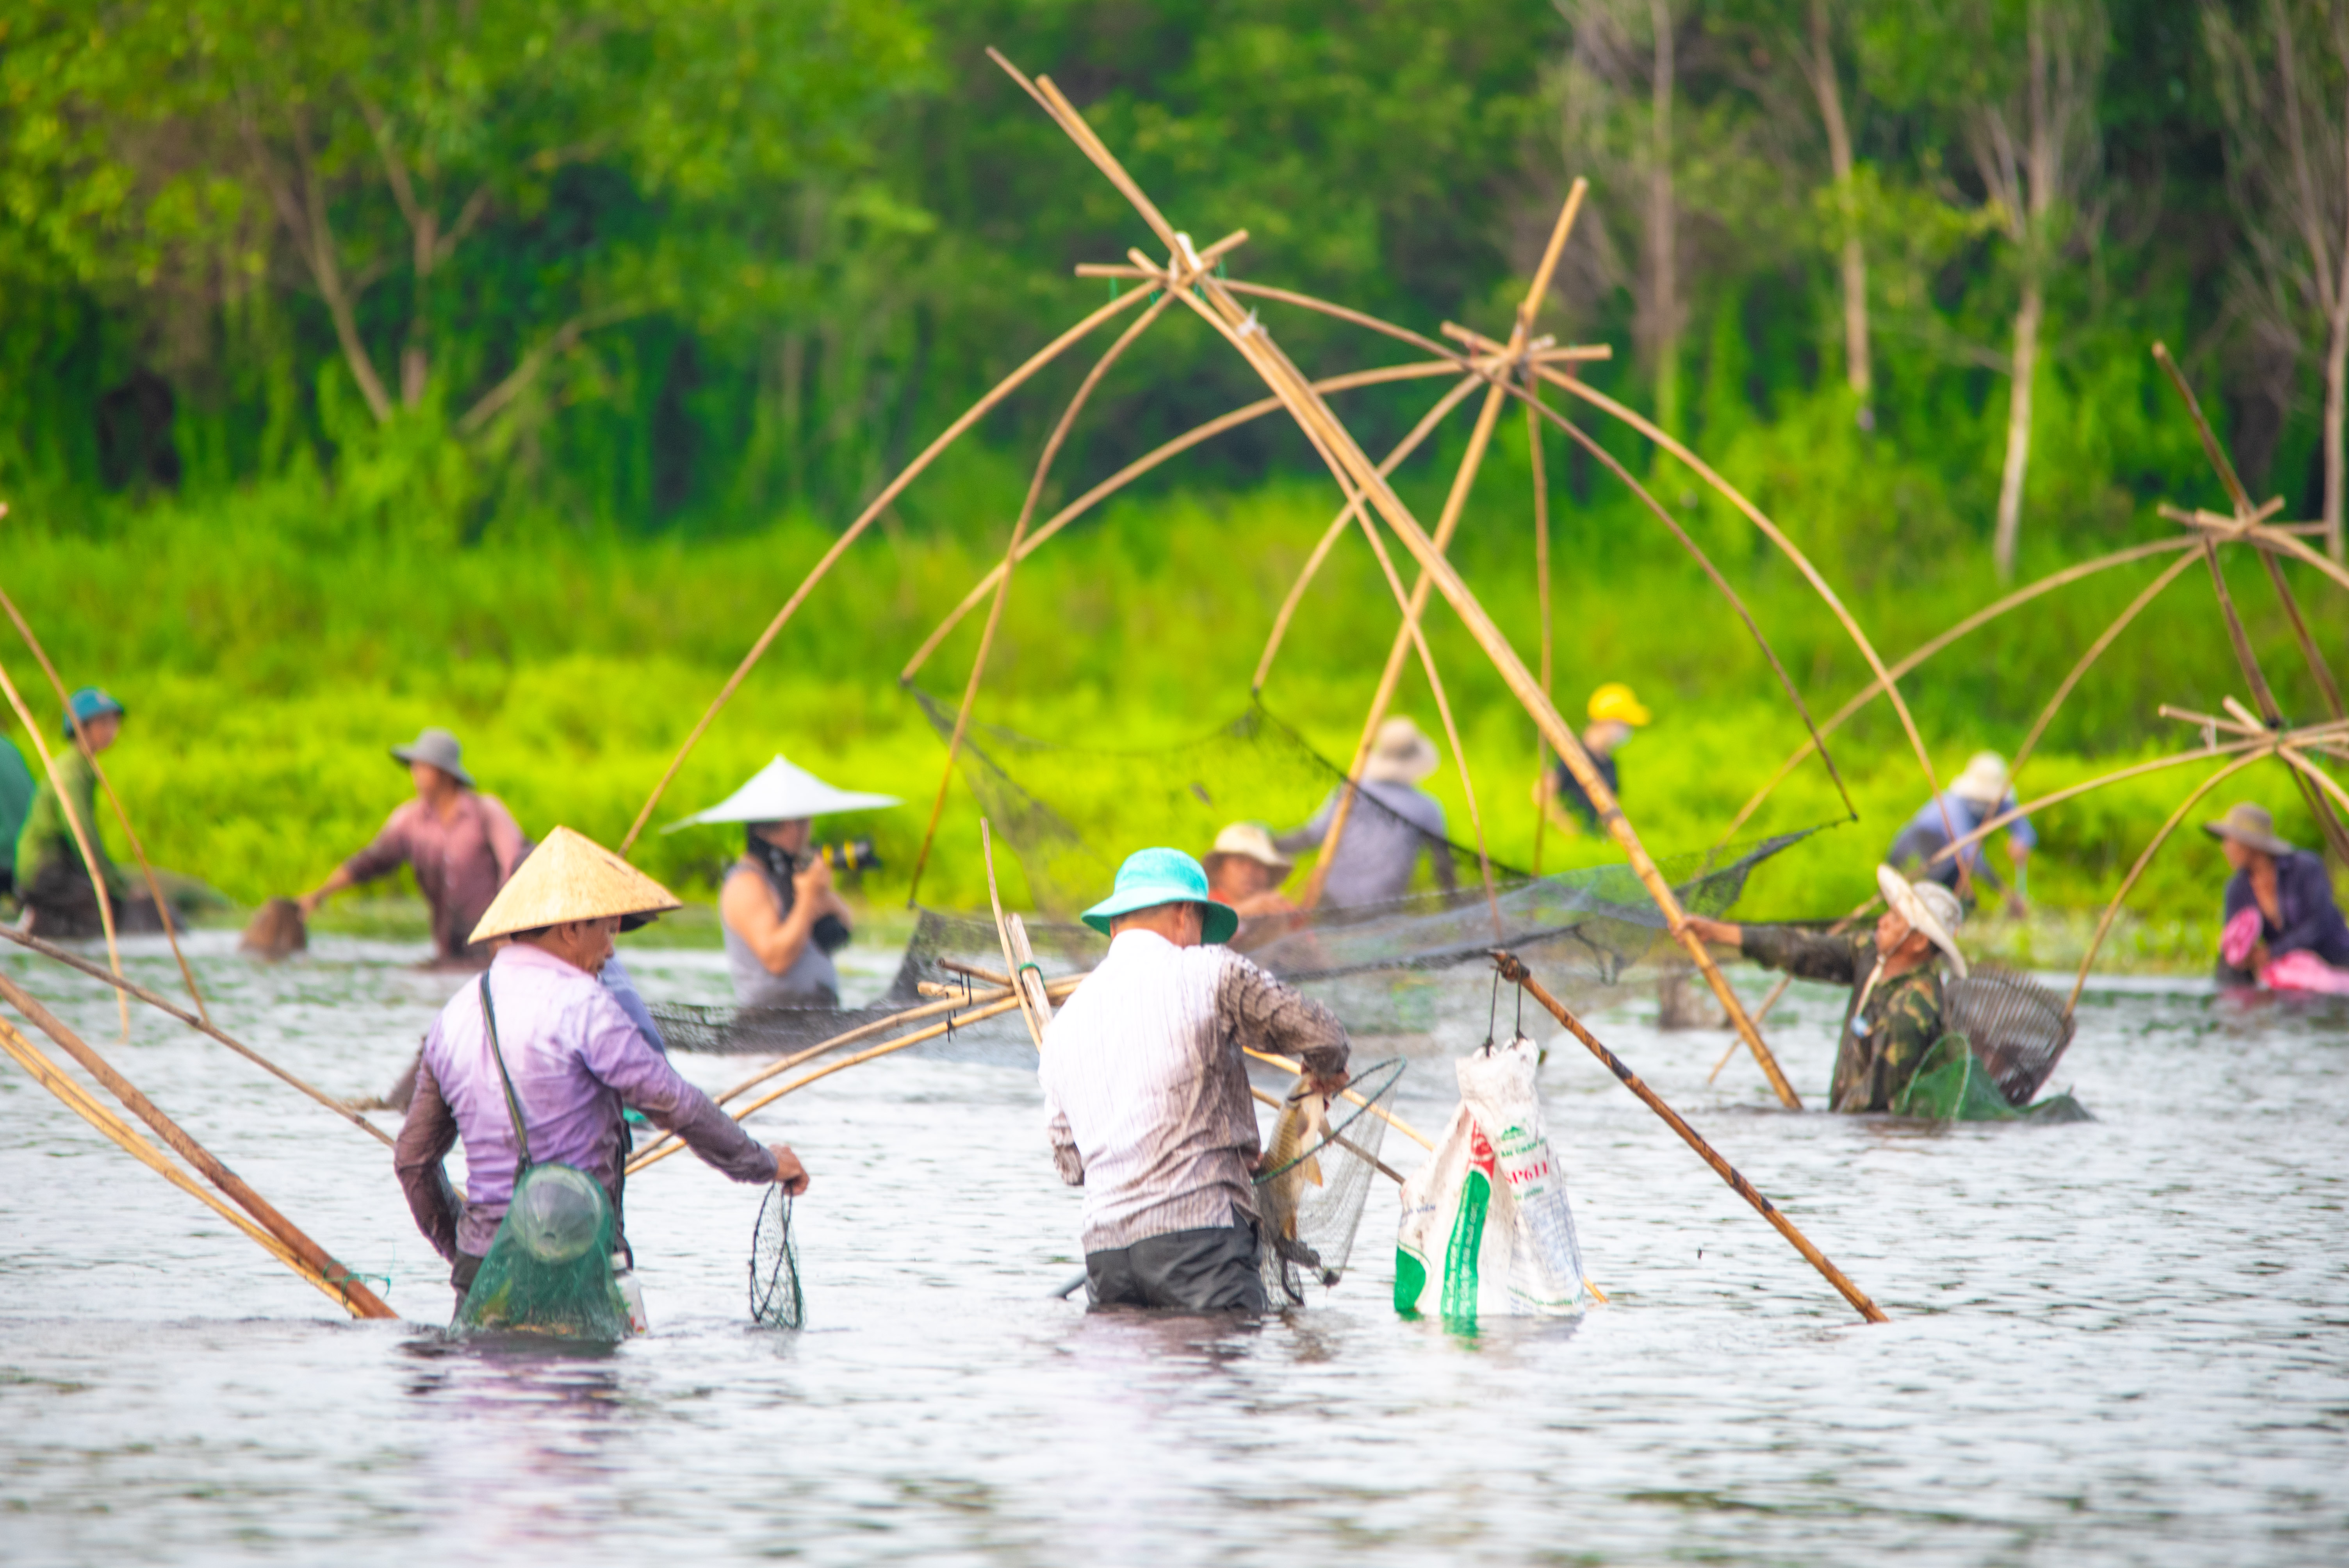 Lift net is an indispensable fishing tool in the festival.	